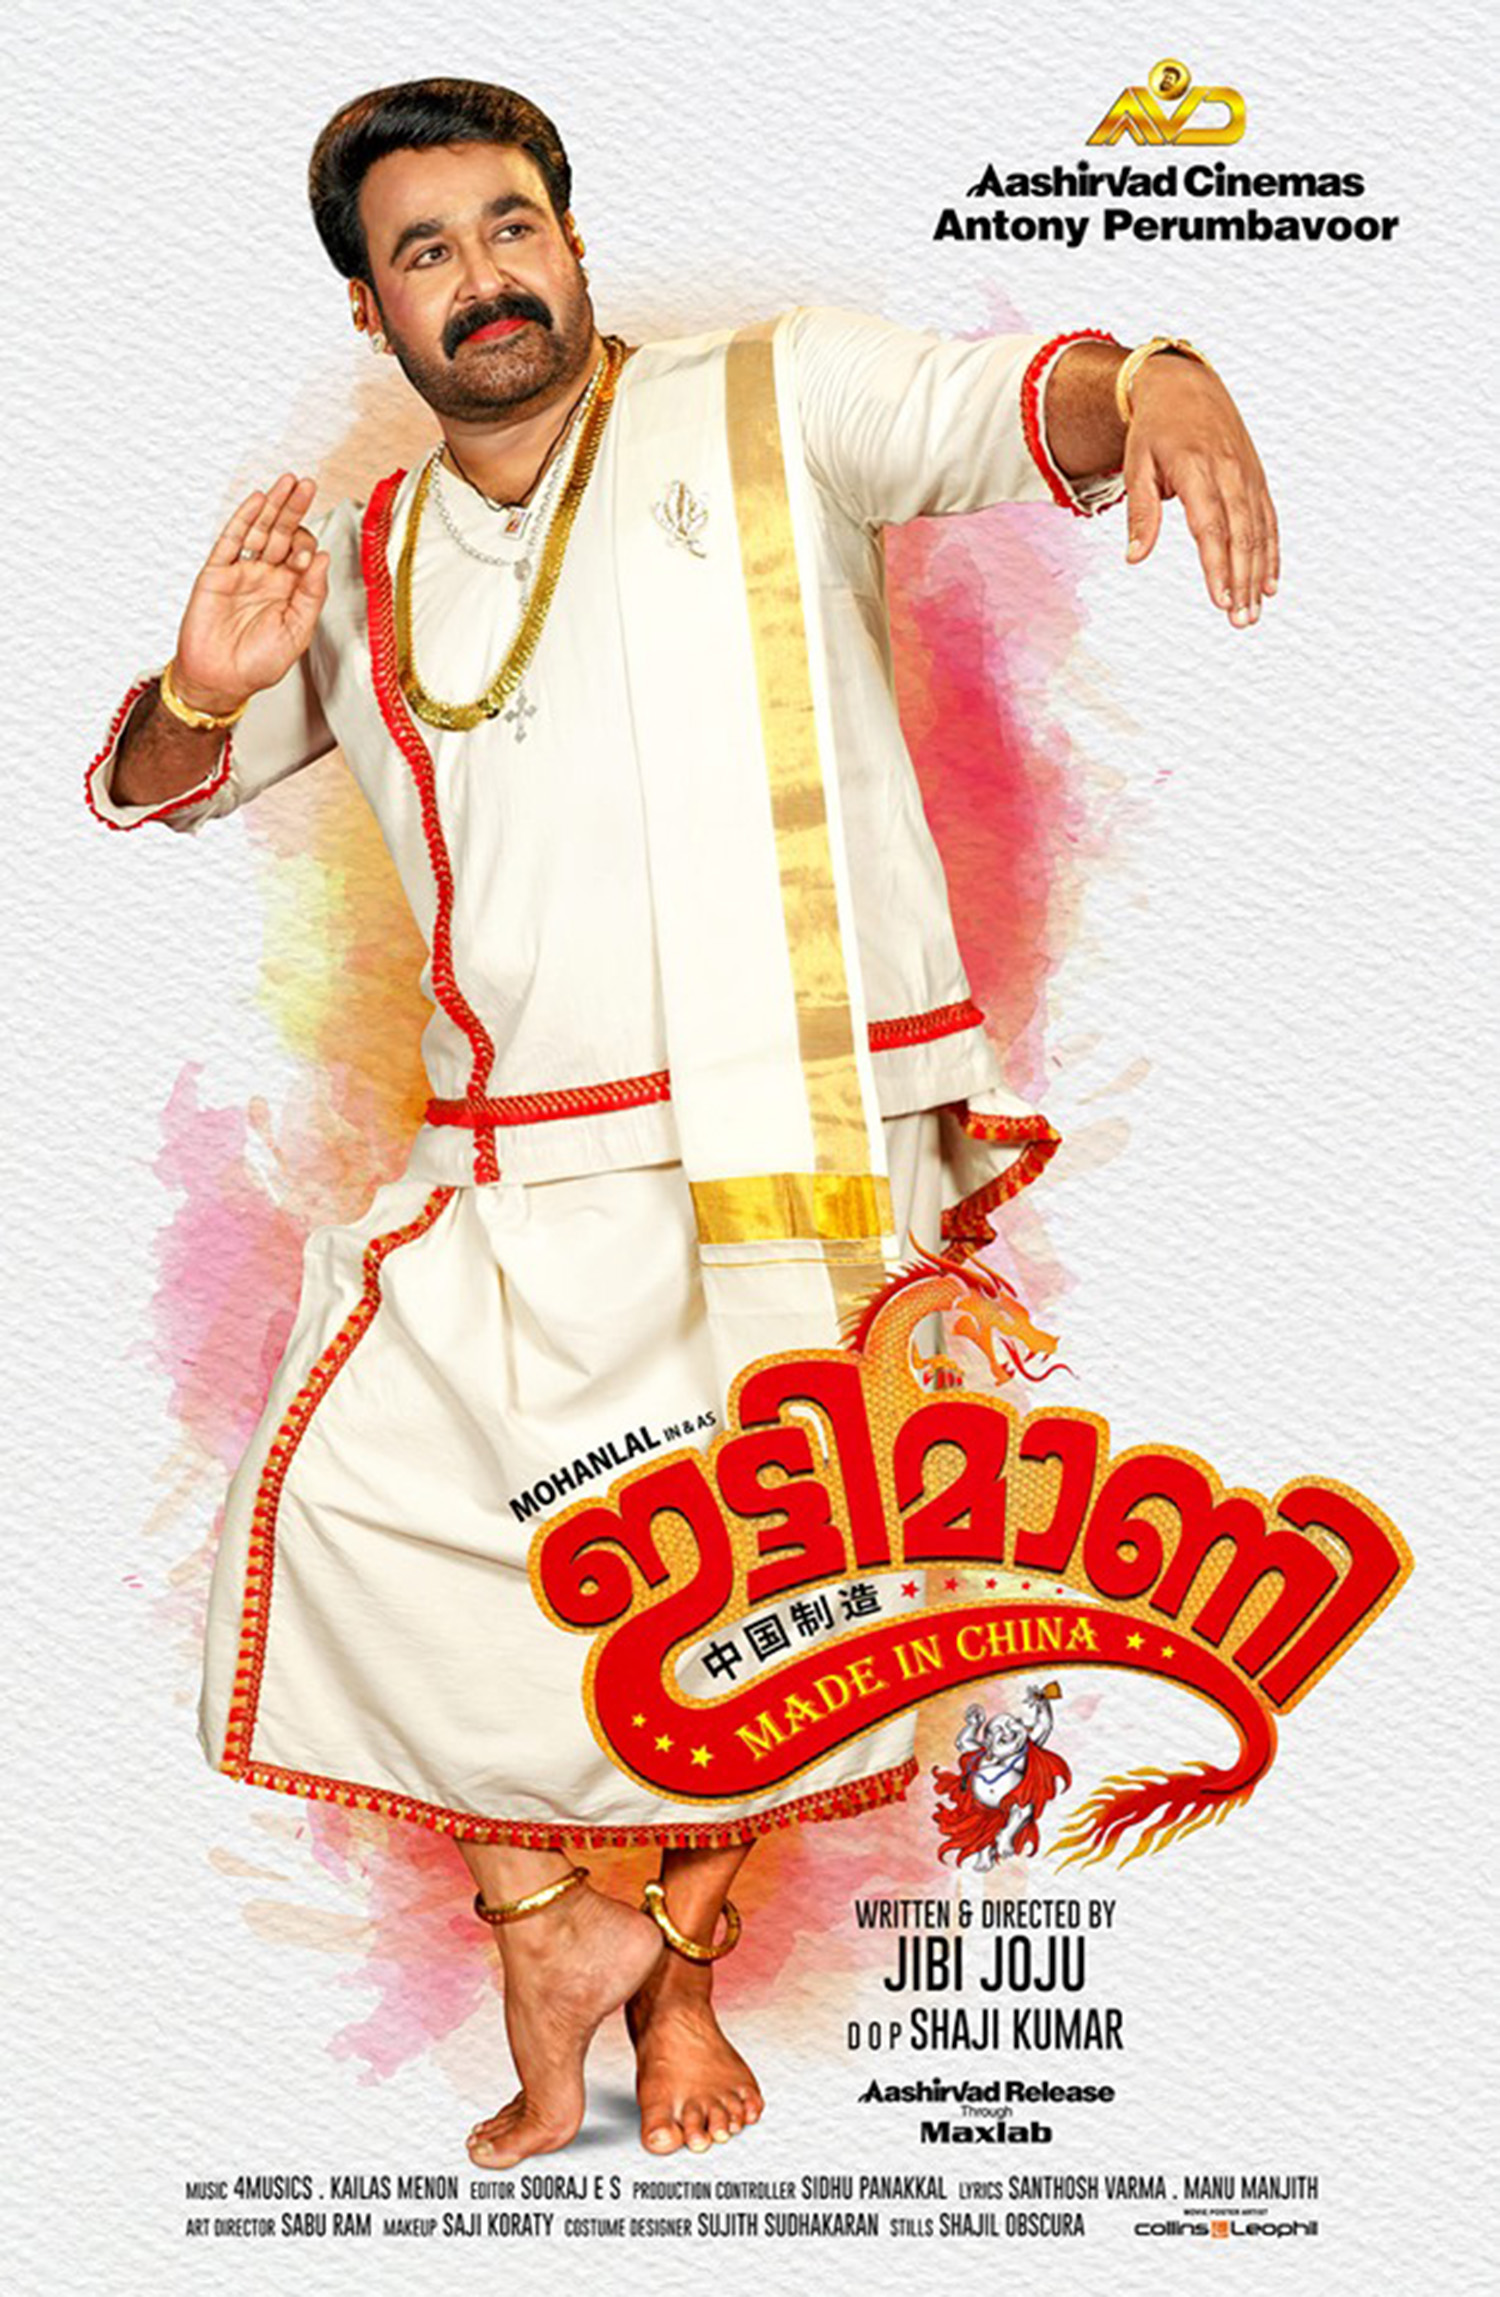 ittymaani made in china first look poster,ittymaani first look poster,mohanlal ittymaani first look poster,ittymaani made in china malayalam movie,ittymaani movie poster,ittymaani made in china poster,mohanlal in ittymaani made in china,mohanlal ittymaani,mohanlal as ittymaani